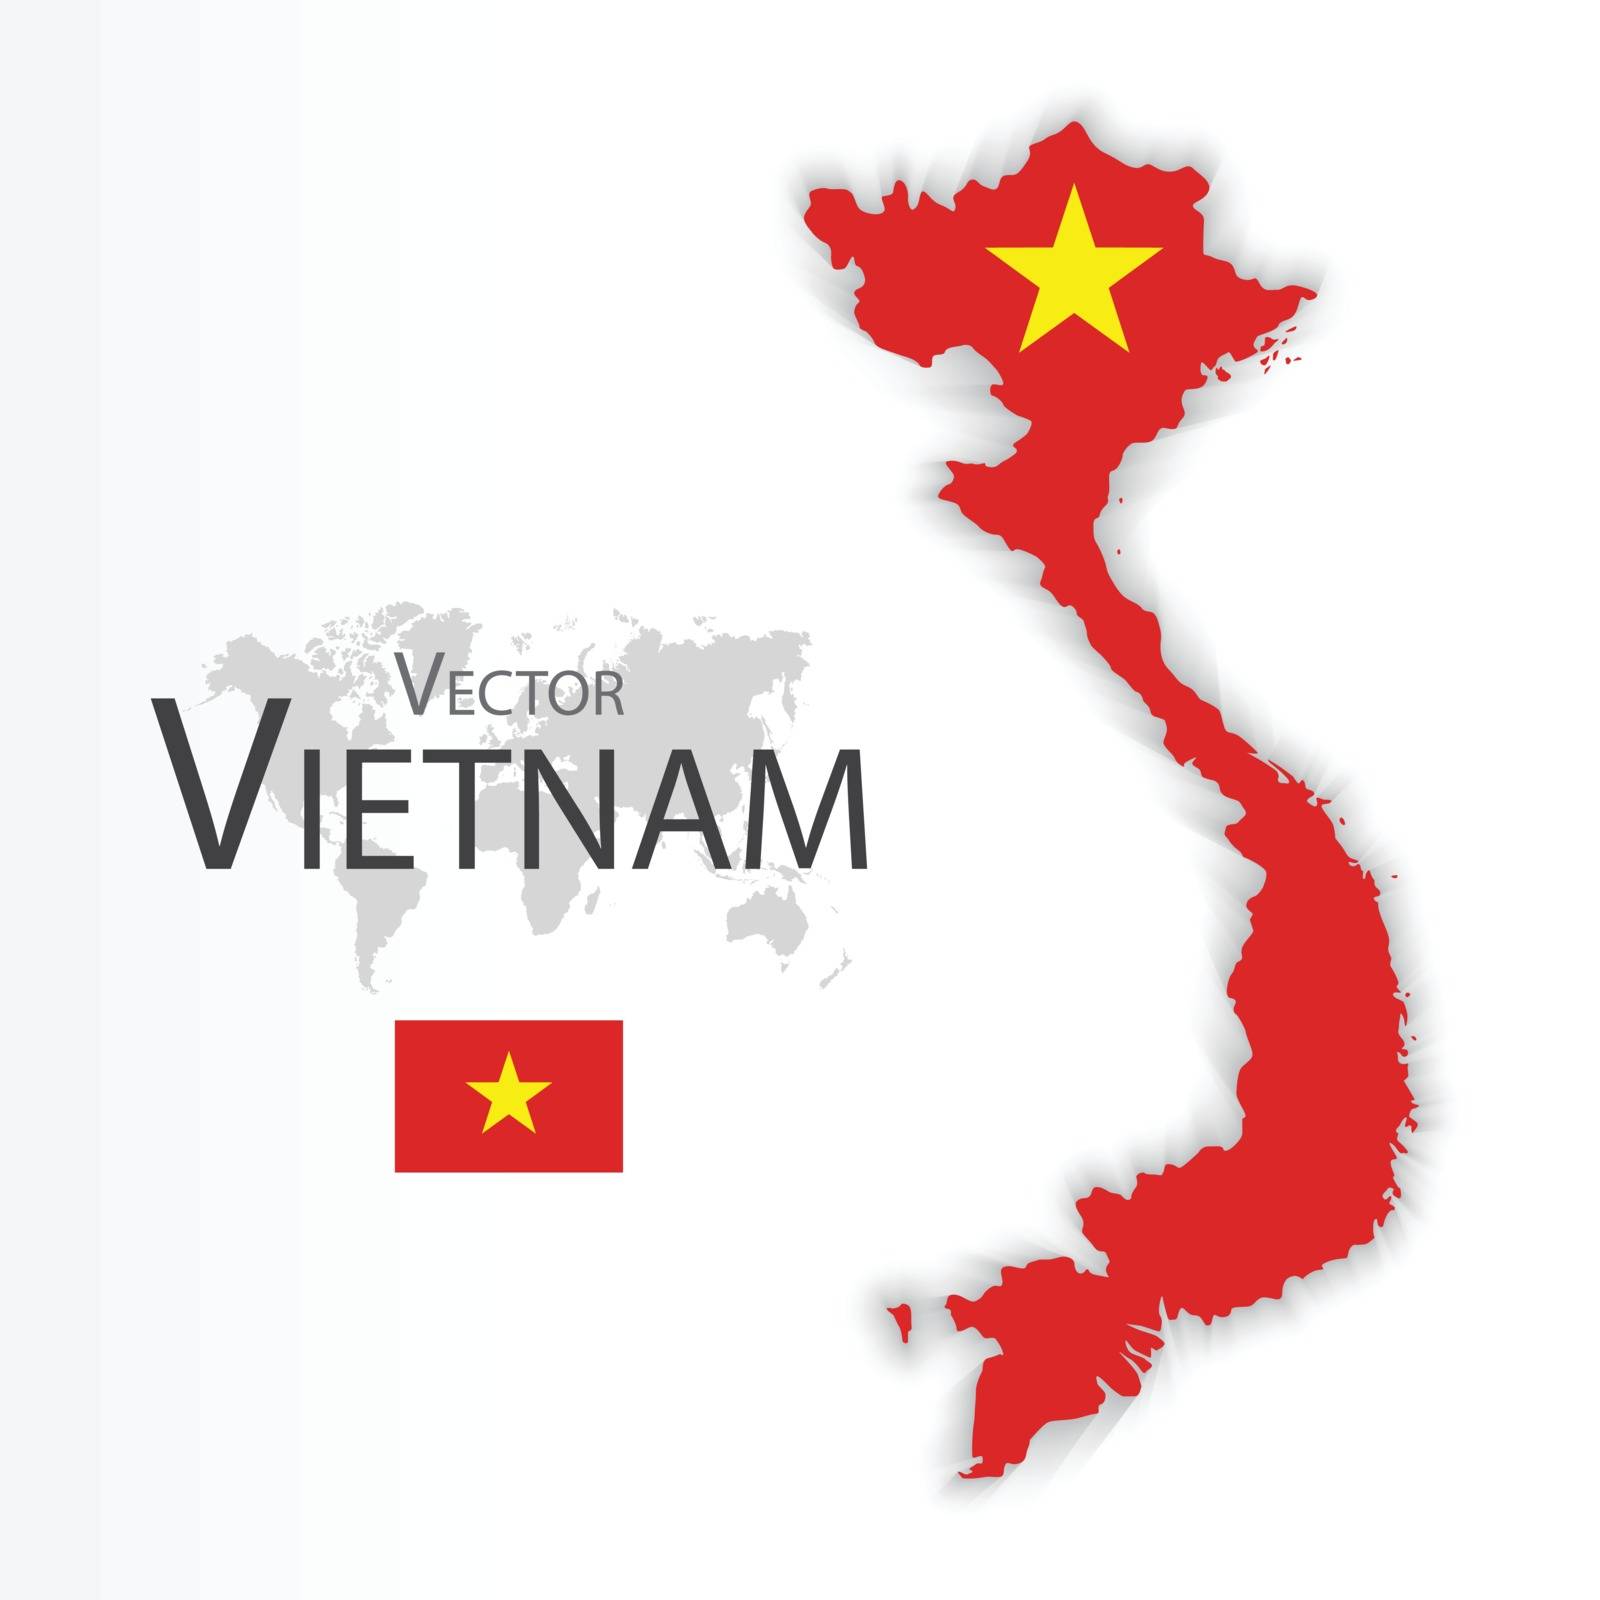 Vietnam ( Socialist Republic of Vietnam )( flag and map )( Transportation and tourism concept ) , vietnam is one of AEC ( ASEAN Economic Community ) by stockdevil